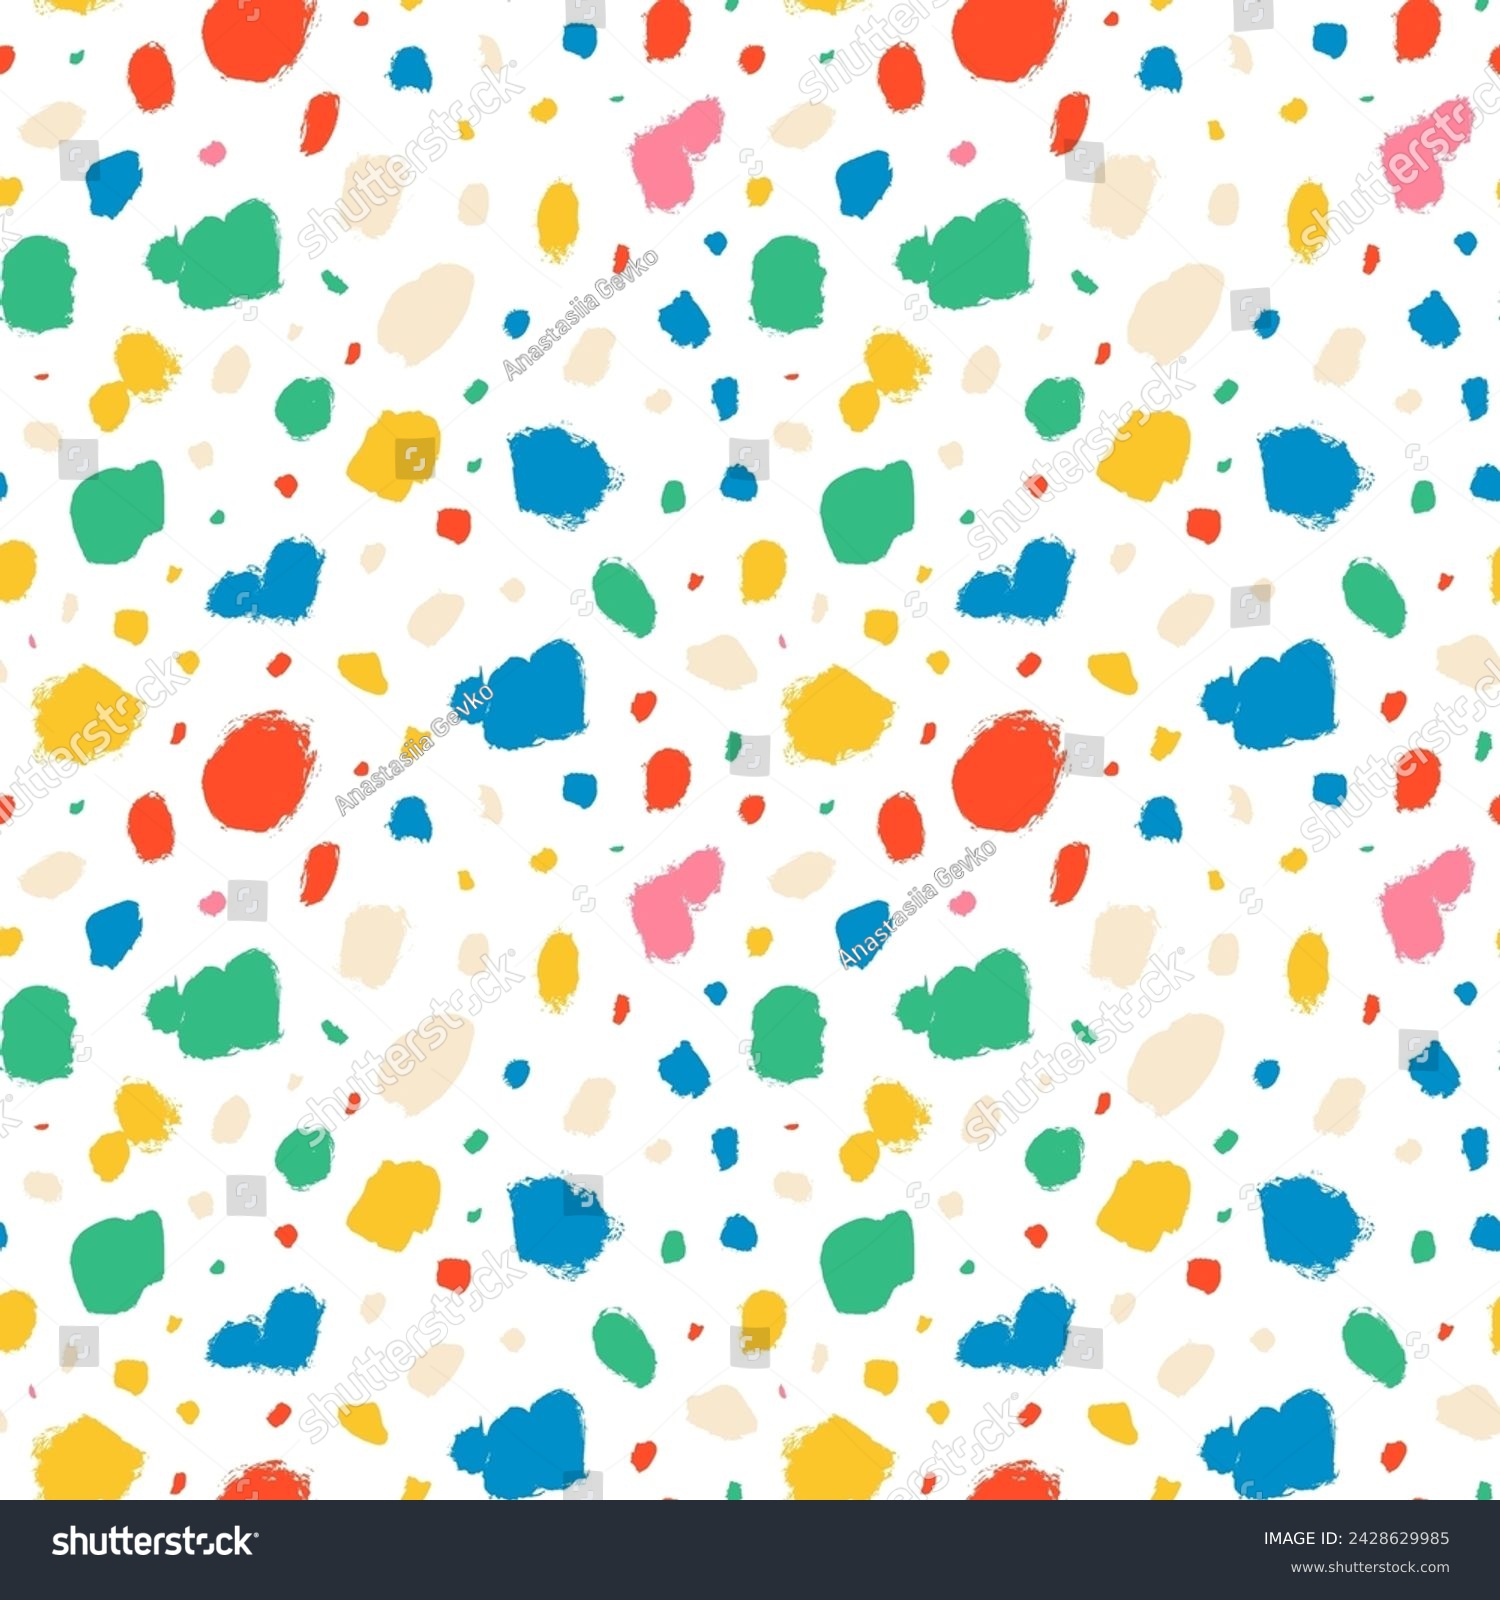 SVG of Dalmatian animal fur seamless pattern in bright colors. Hand drawn grunge blots and spots. Various brush strokes. Stained background. Random hand drawn spots. Abstract blobs texture. Ink splatter. svg